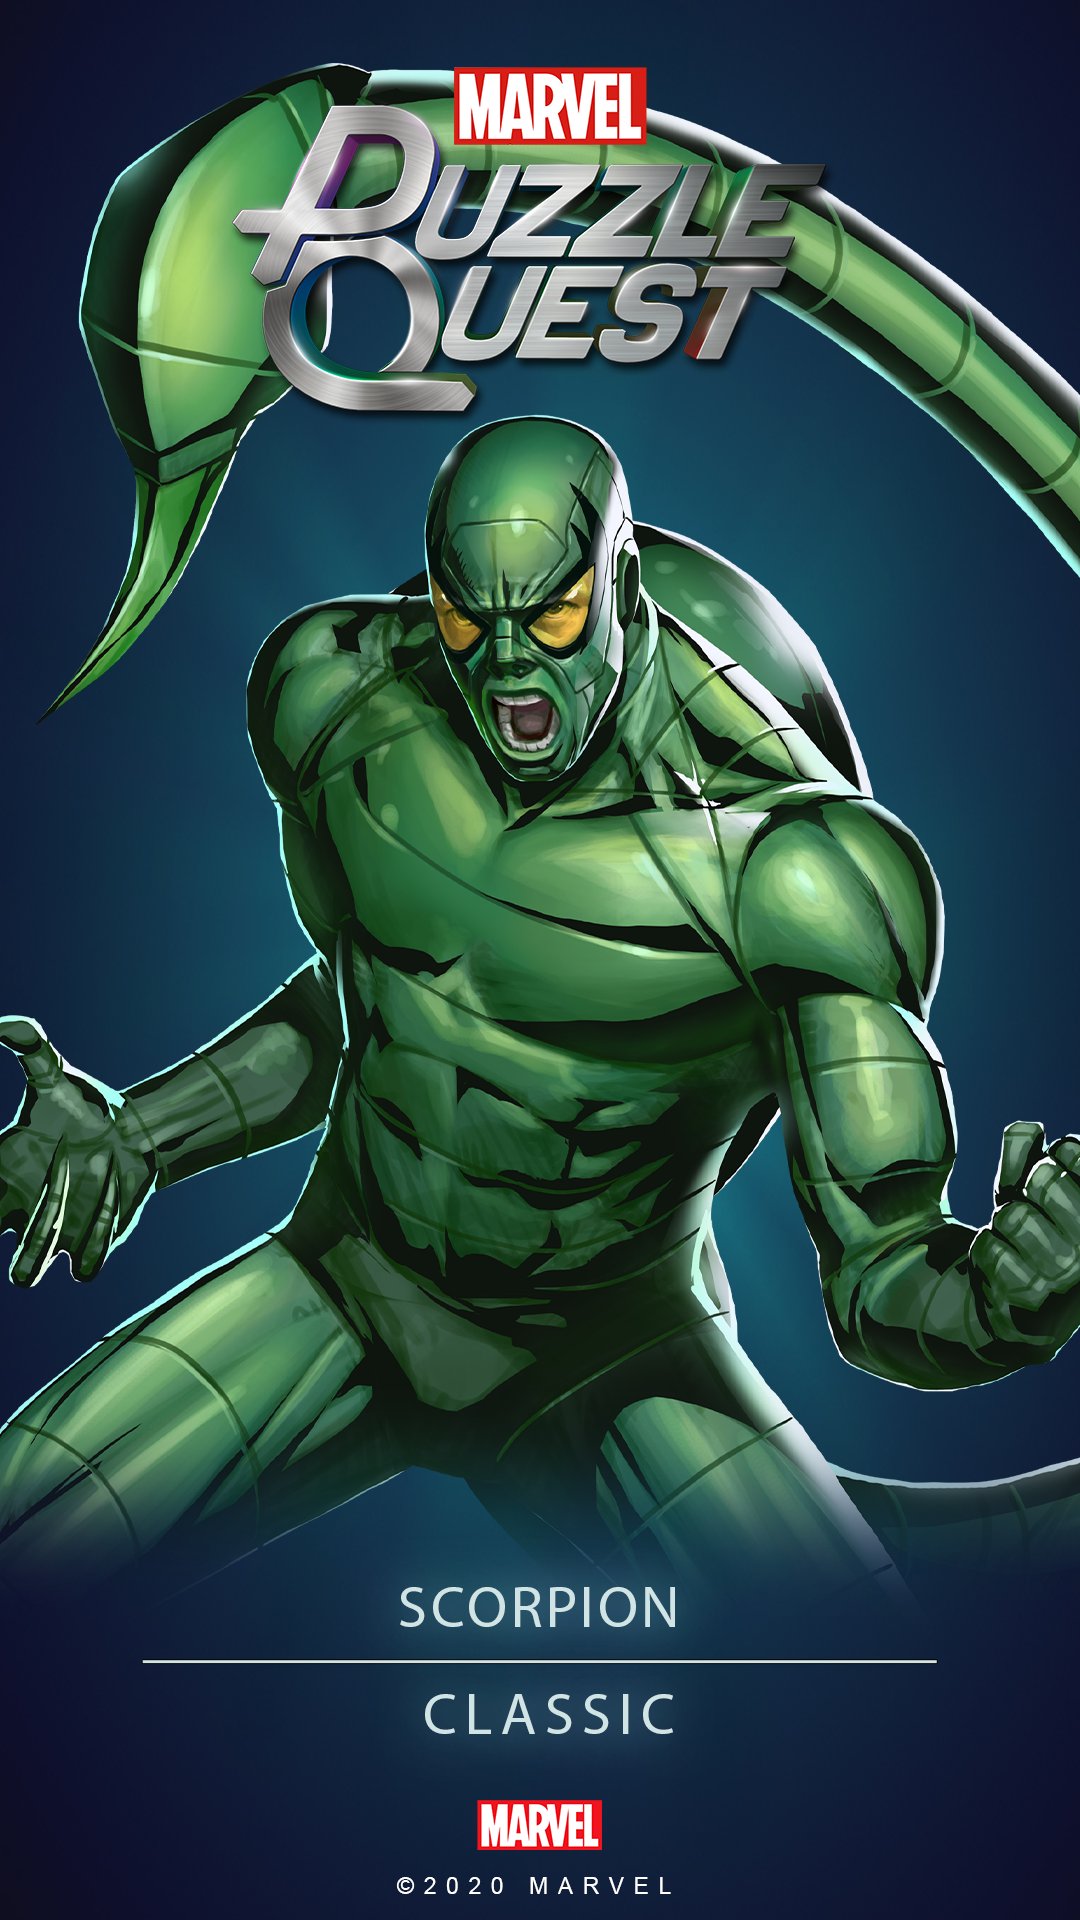 MARVEL Puzzle Quest truly are a sting of beautythe Scorpion Wallpaper are here! #MarvelPuzzleQuest #Scorpion